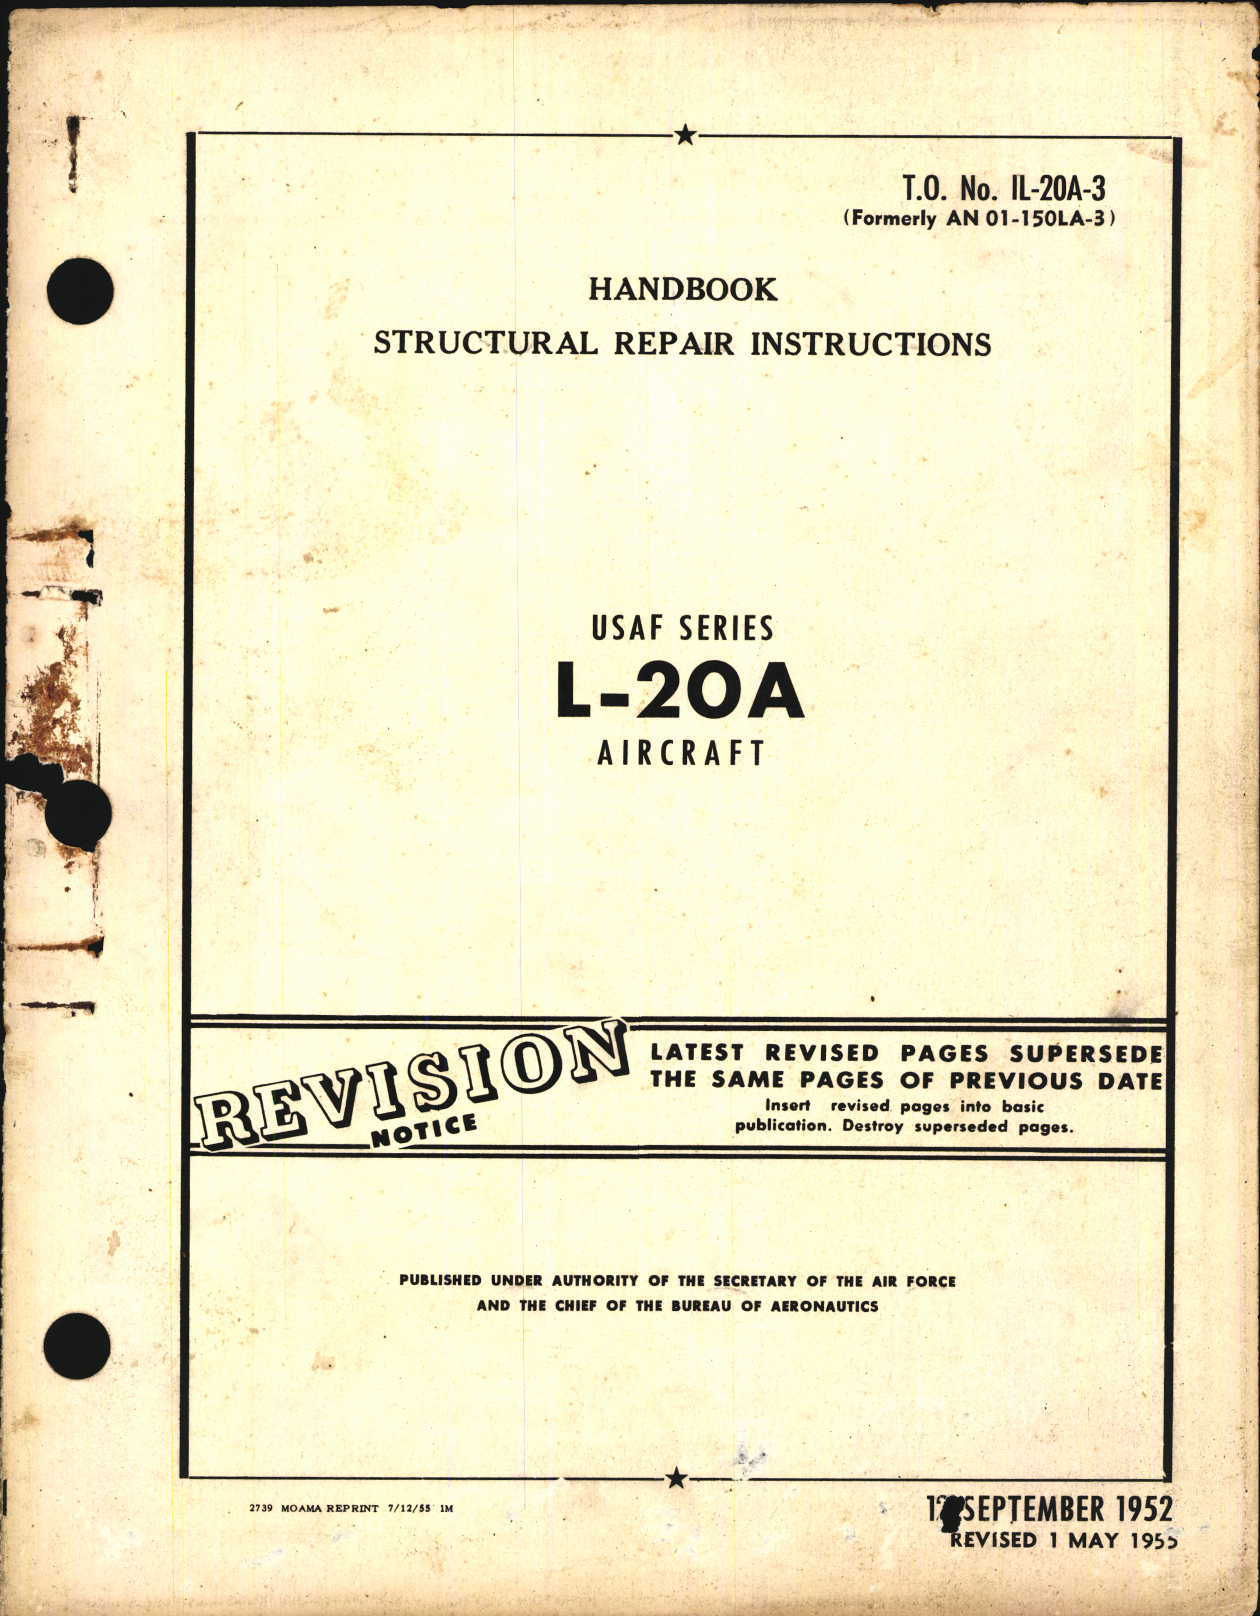 Sample page 1 from AirCorps Library document: Structural Repair Instructions for L-20A